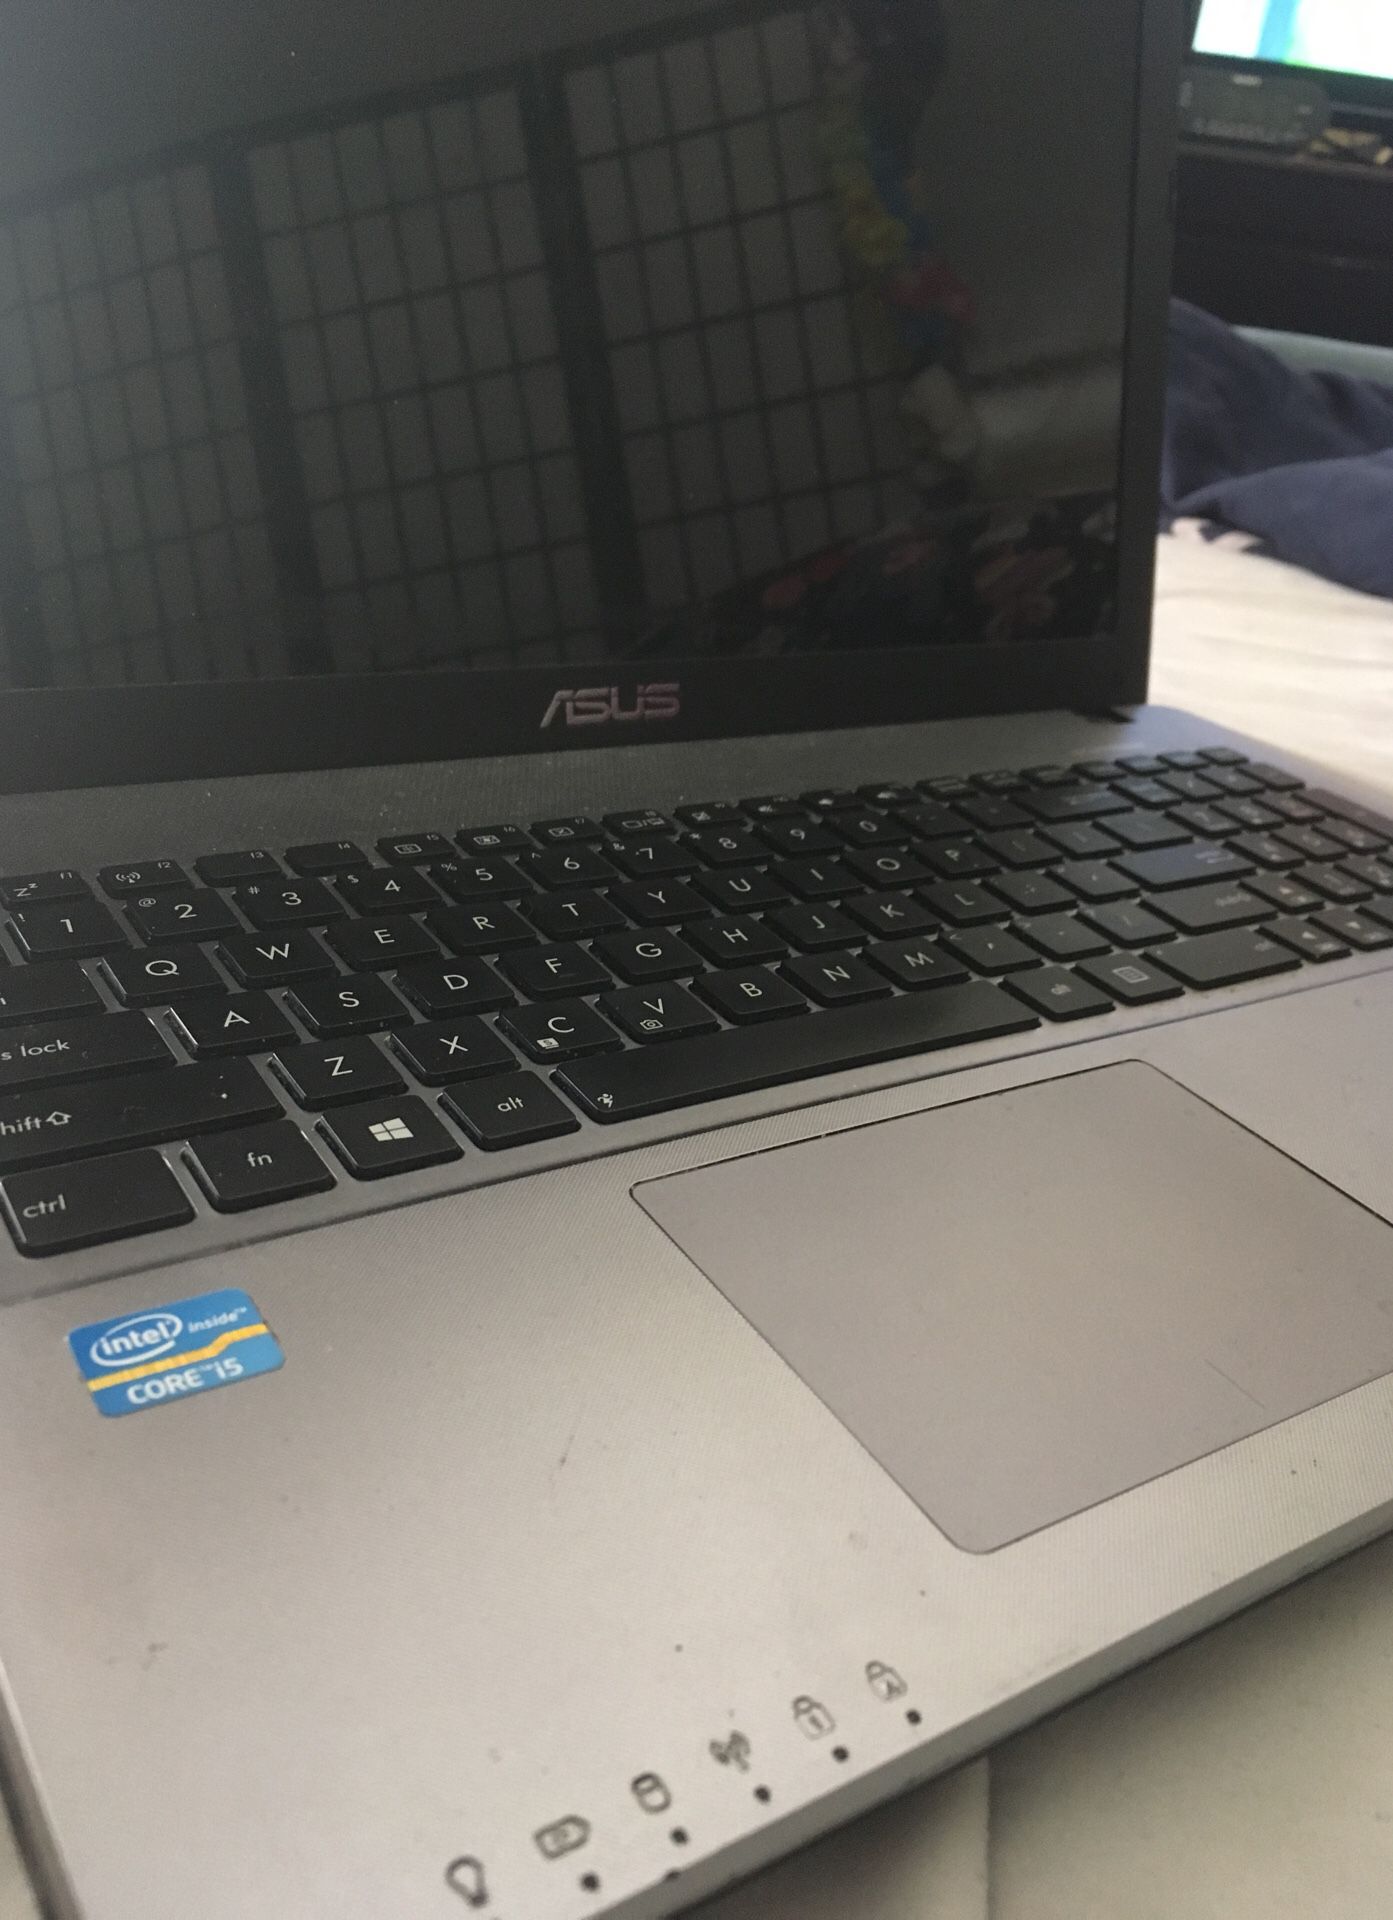 Asus notebook in good working condition. i5 processor. $225